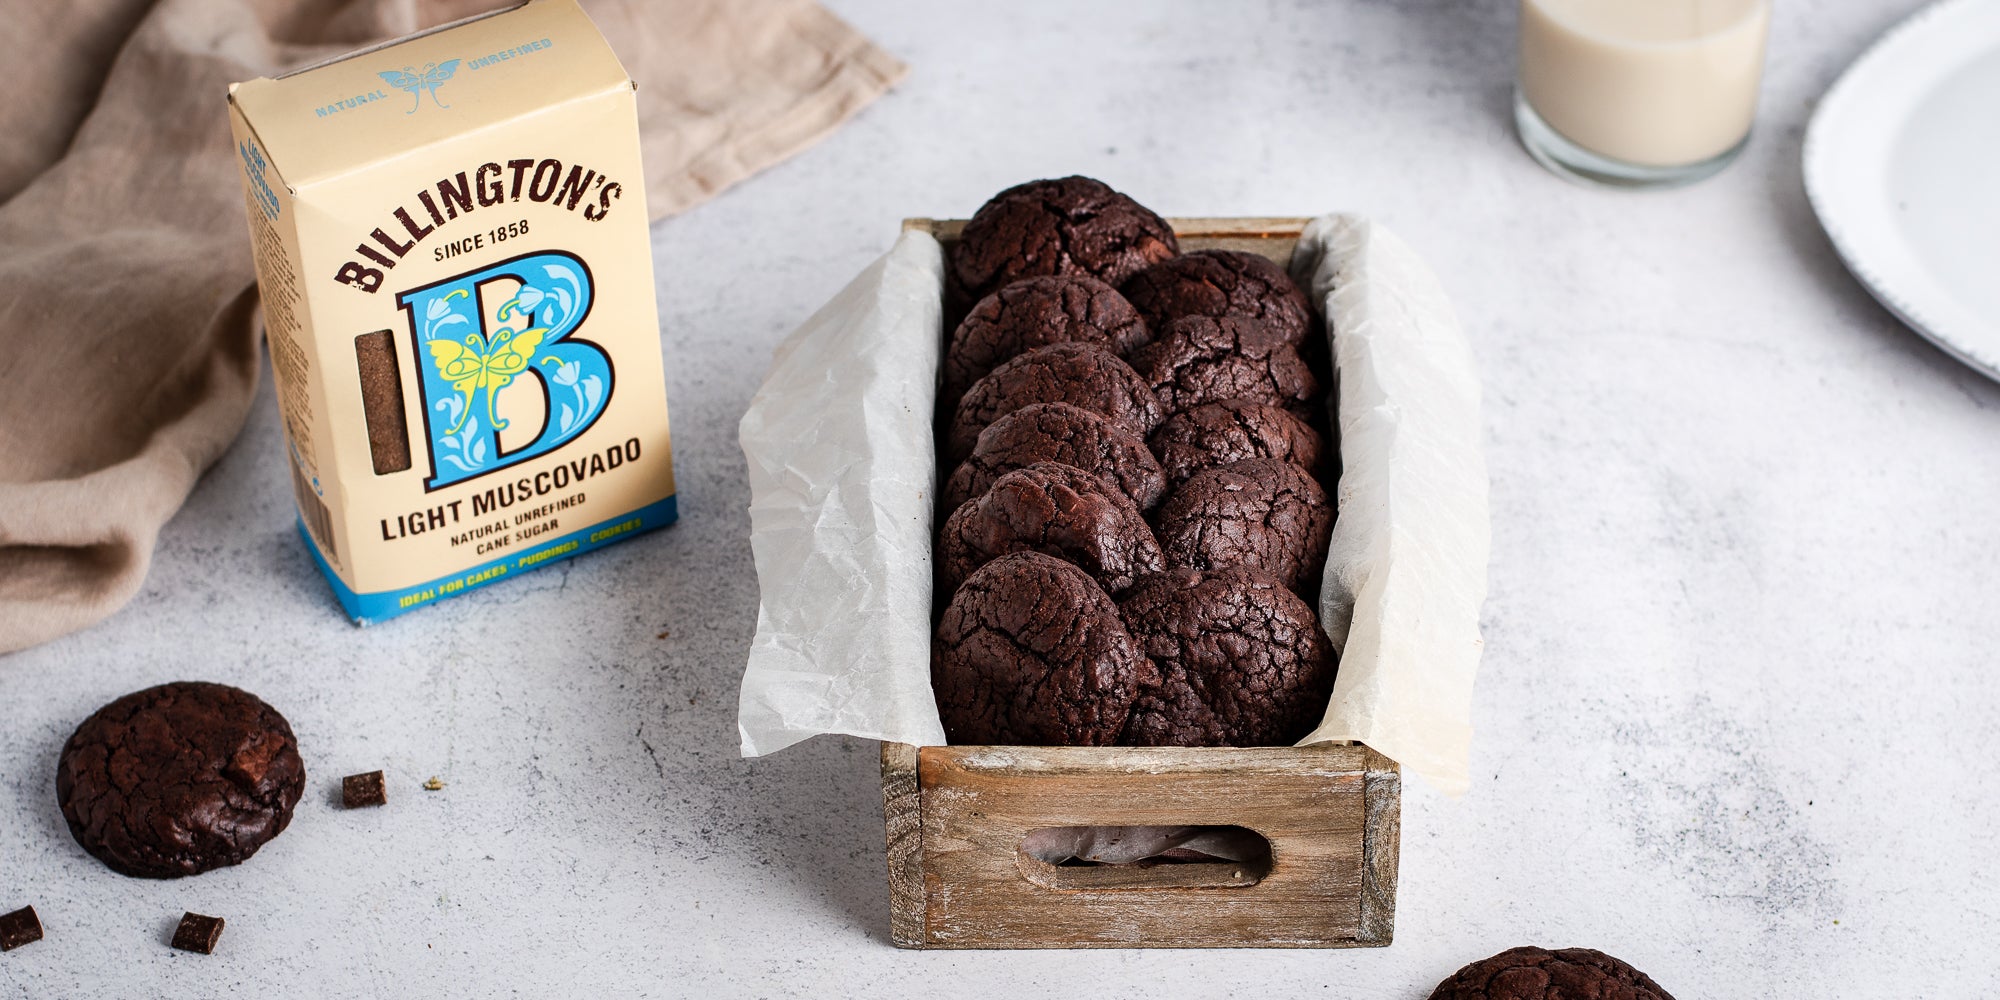 Chocolate Brownie Cookies in parchment paper in a wooden box next to a box of Billington's Light Muscovado Sugar